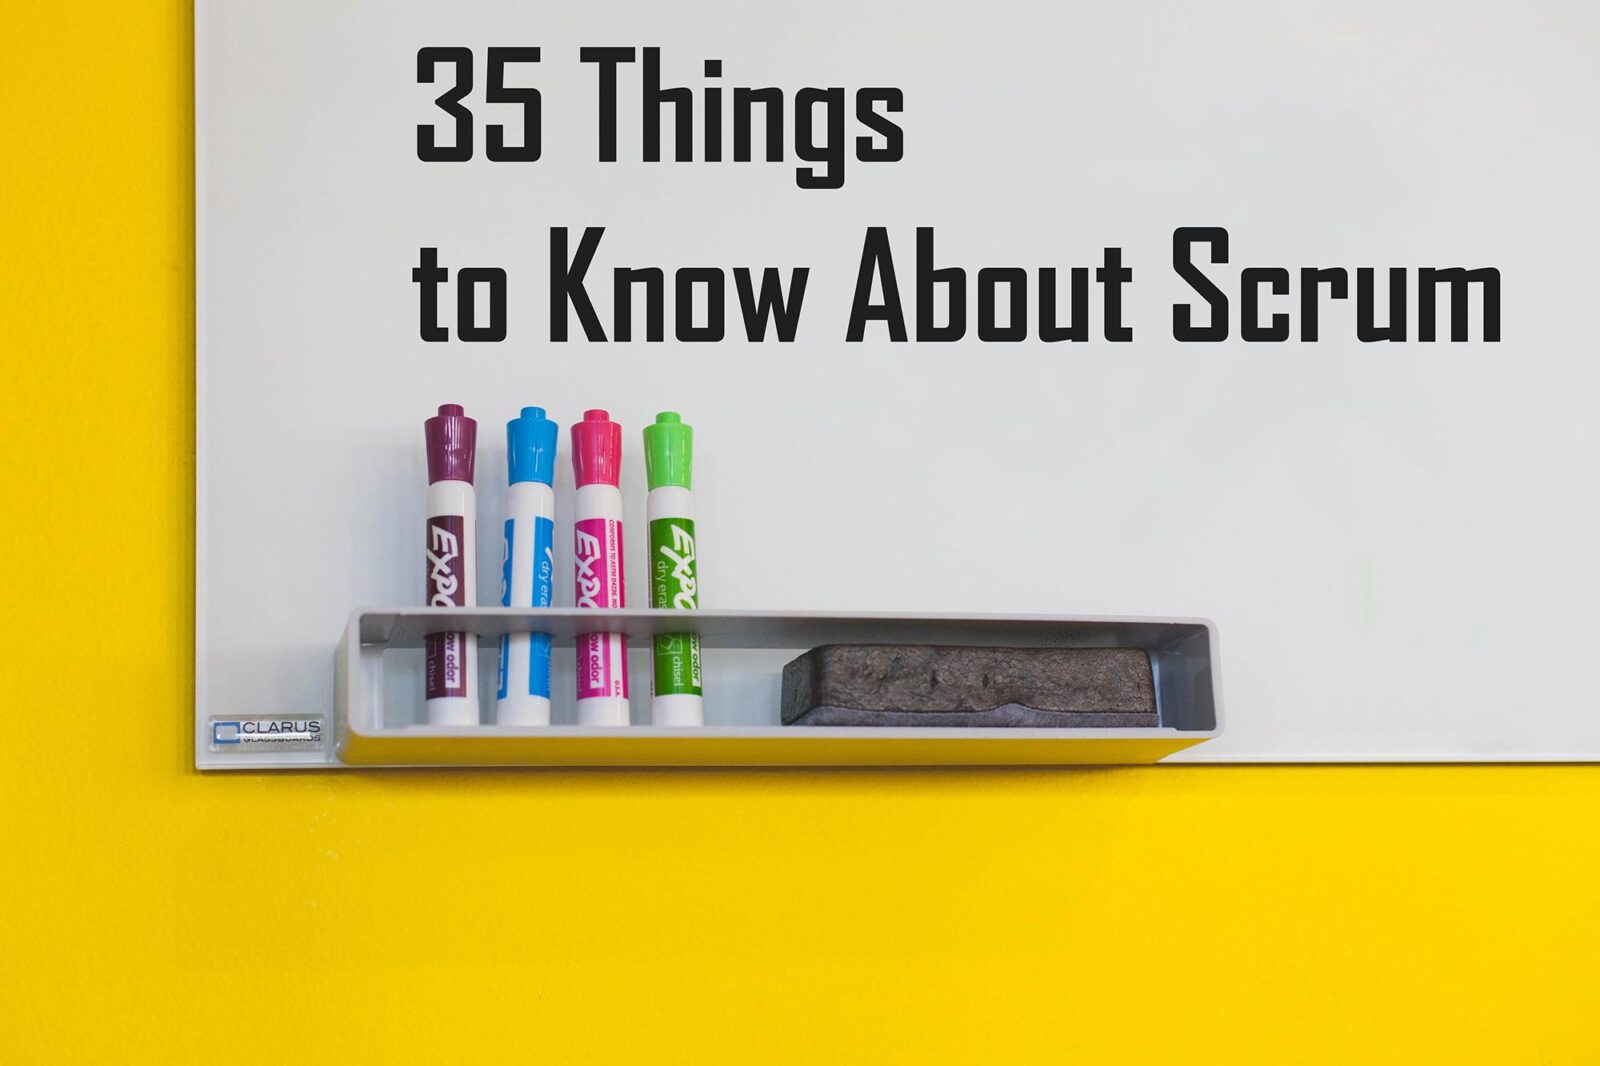 35 things to know about scrum., adoriasoft scrum team, agile development